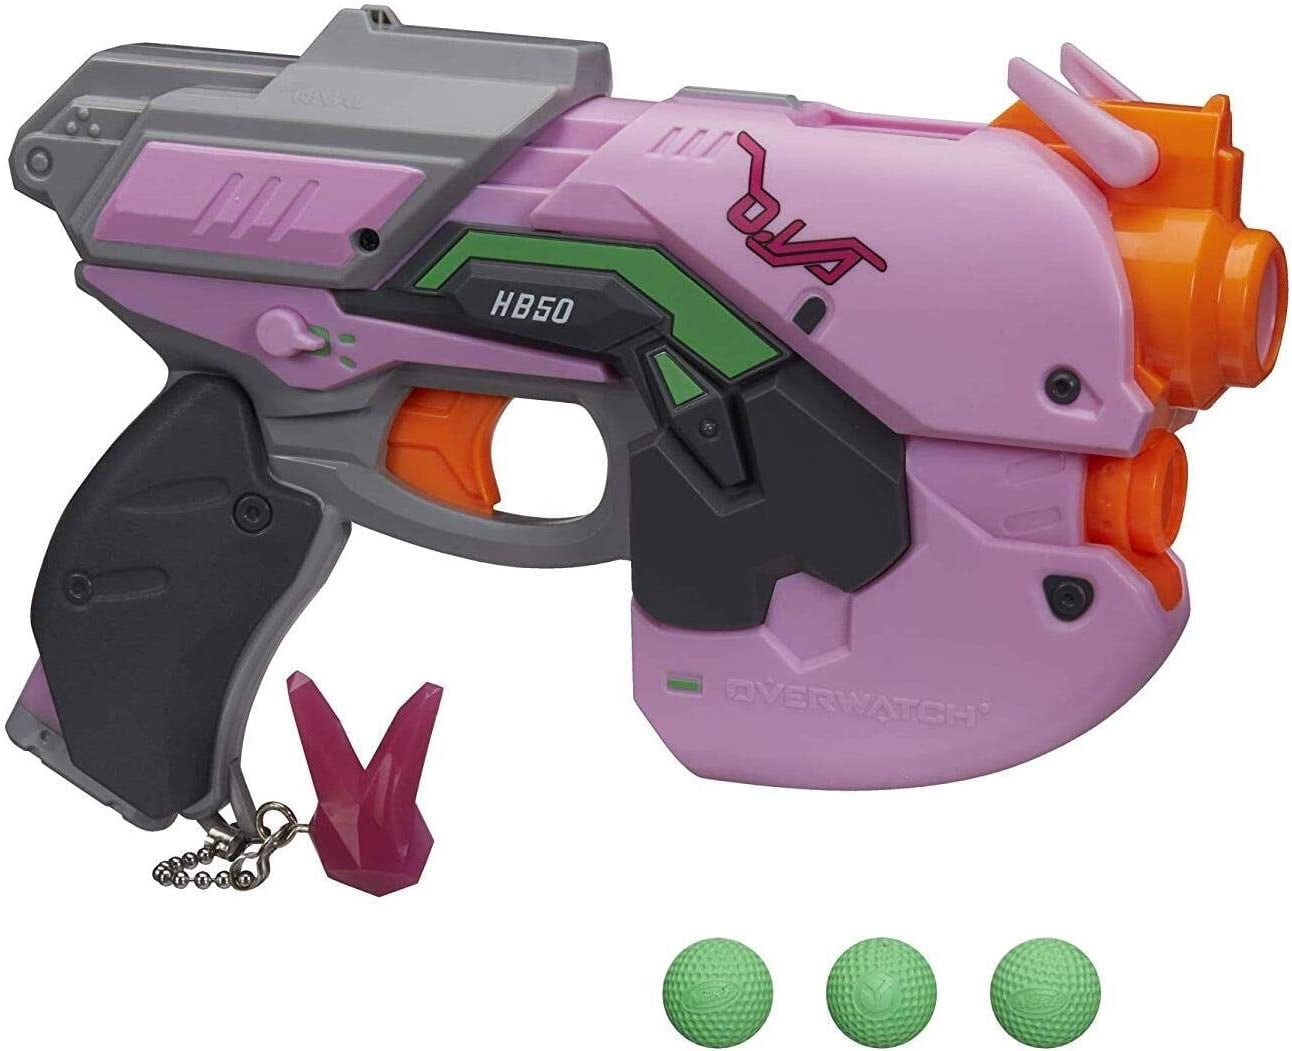 NERF Micro Shots Overwatch D.va Pink 02 Gun Hasbro Collectible With Darts for sale online 